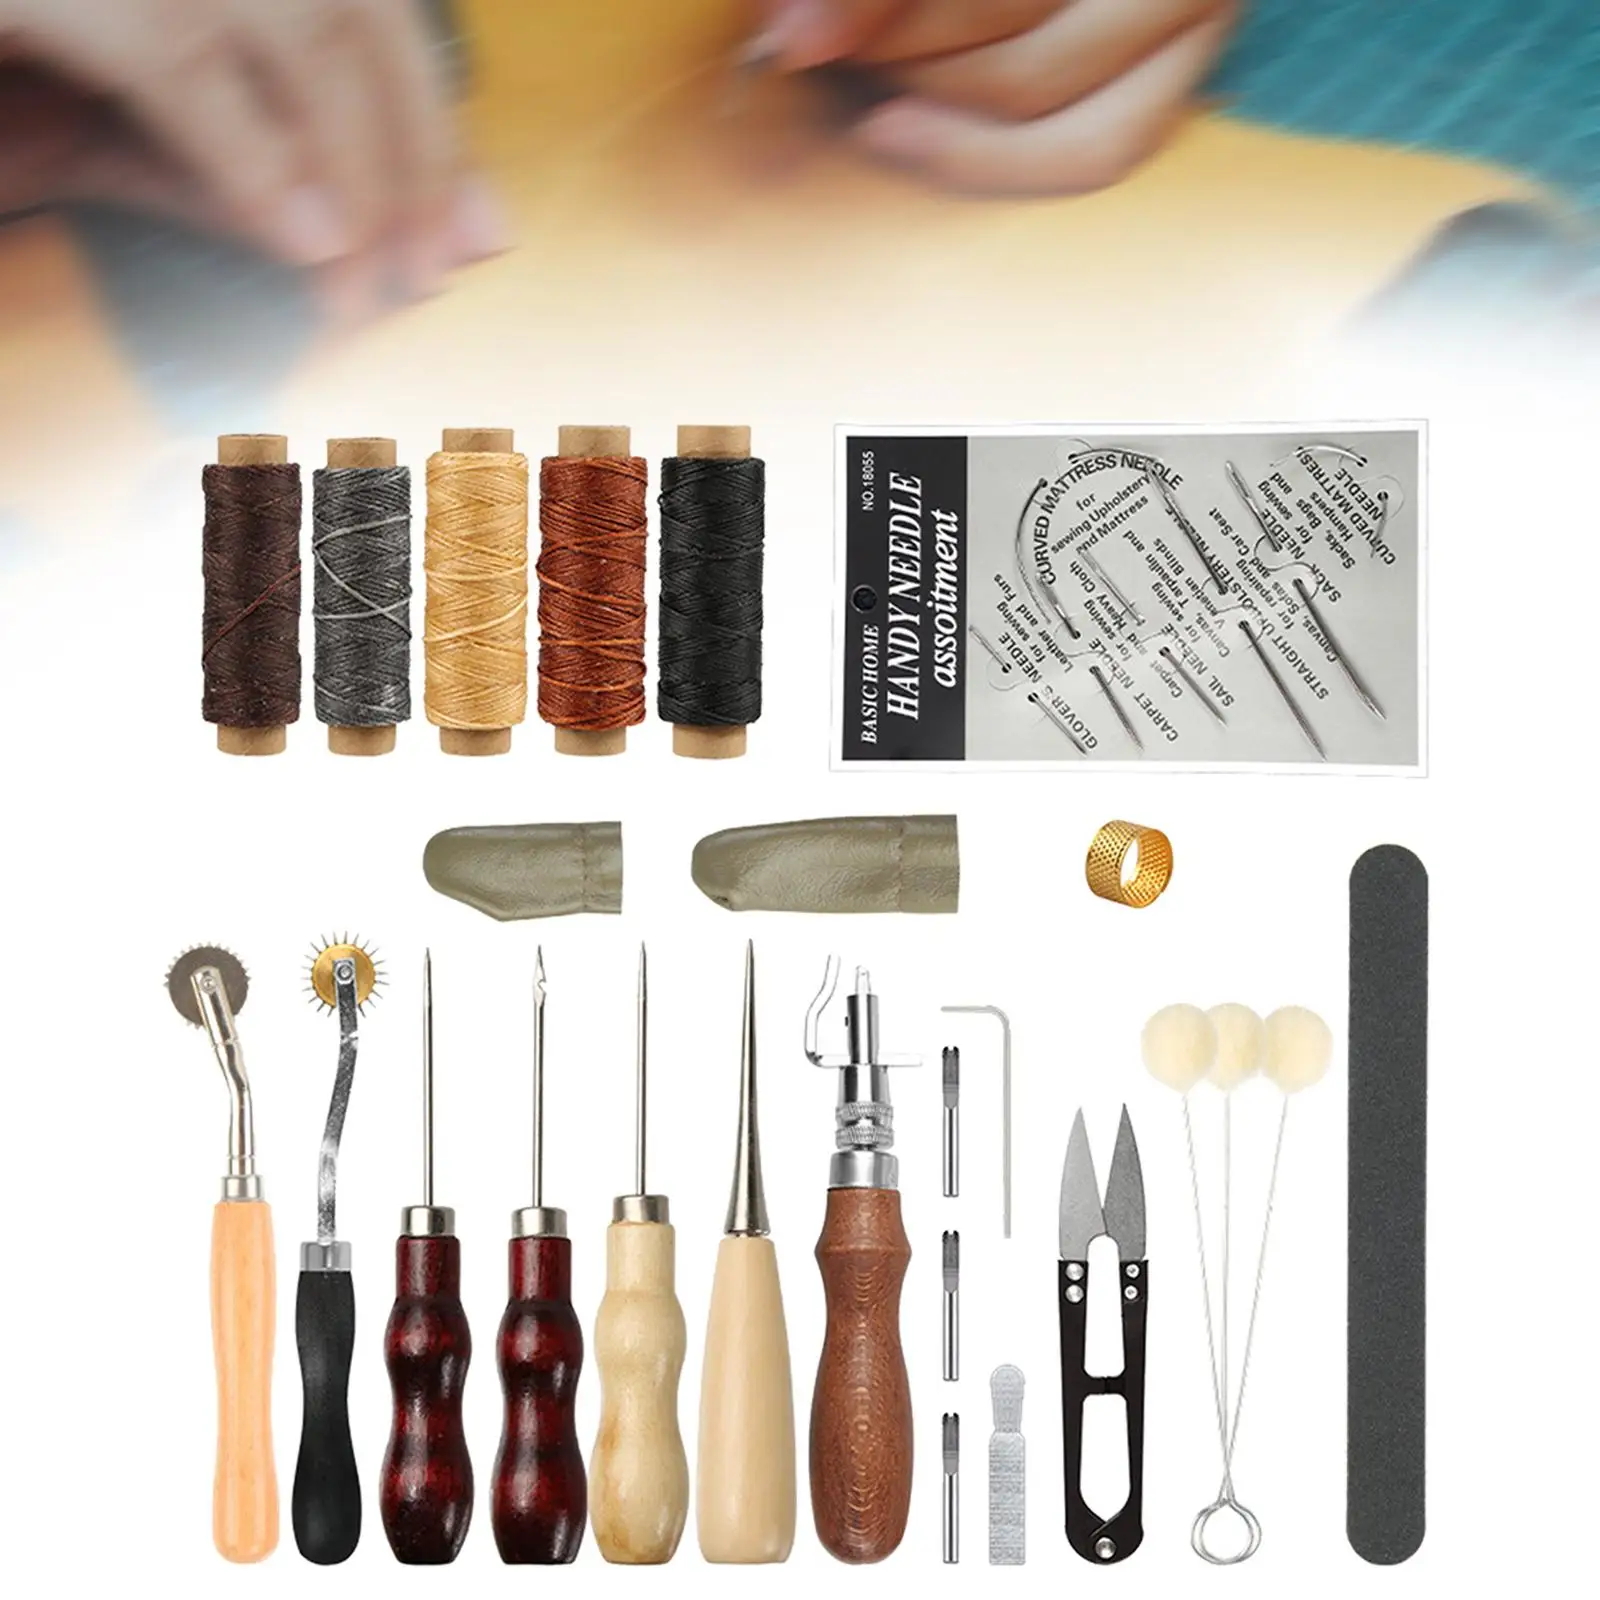 Leather Working Tools Set with 5 Color Waxed Thread Practical DIY Leather Crafting Tools and Supplies for Leather Craft Making